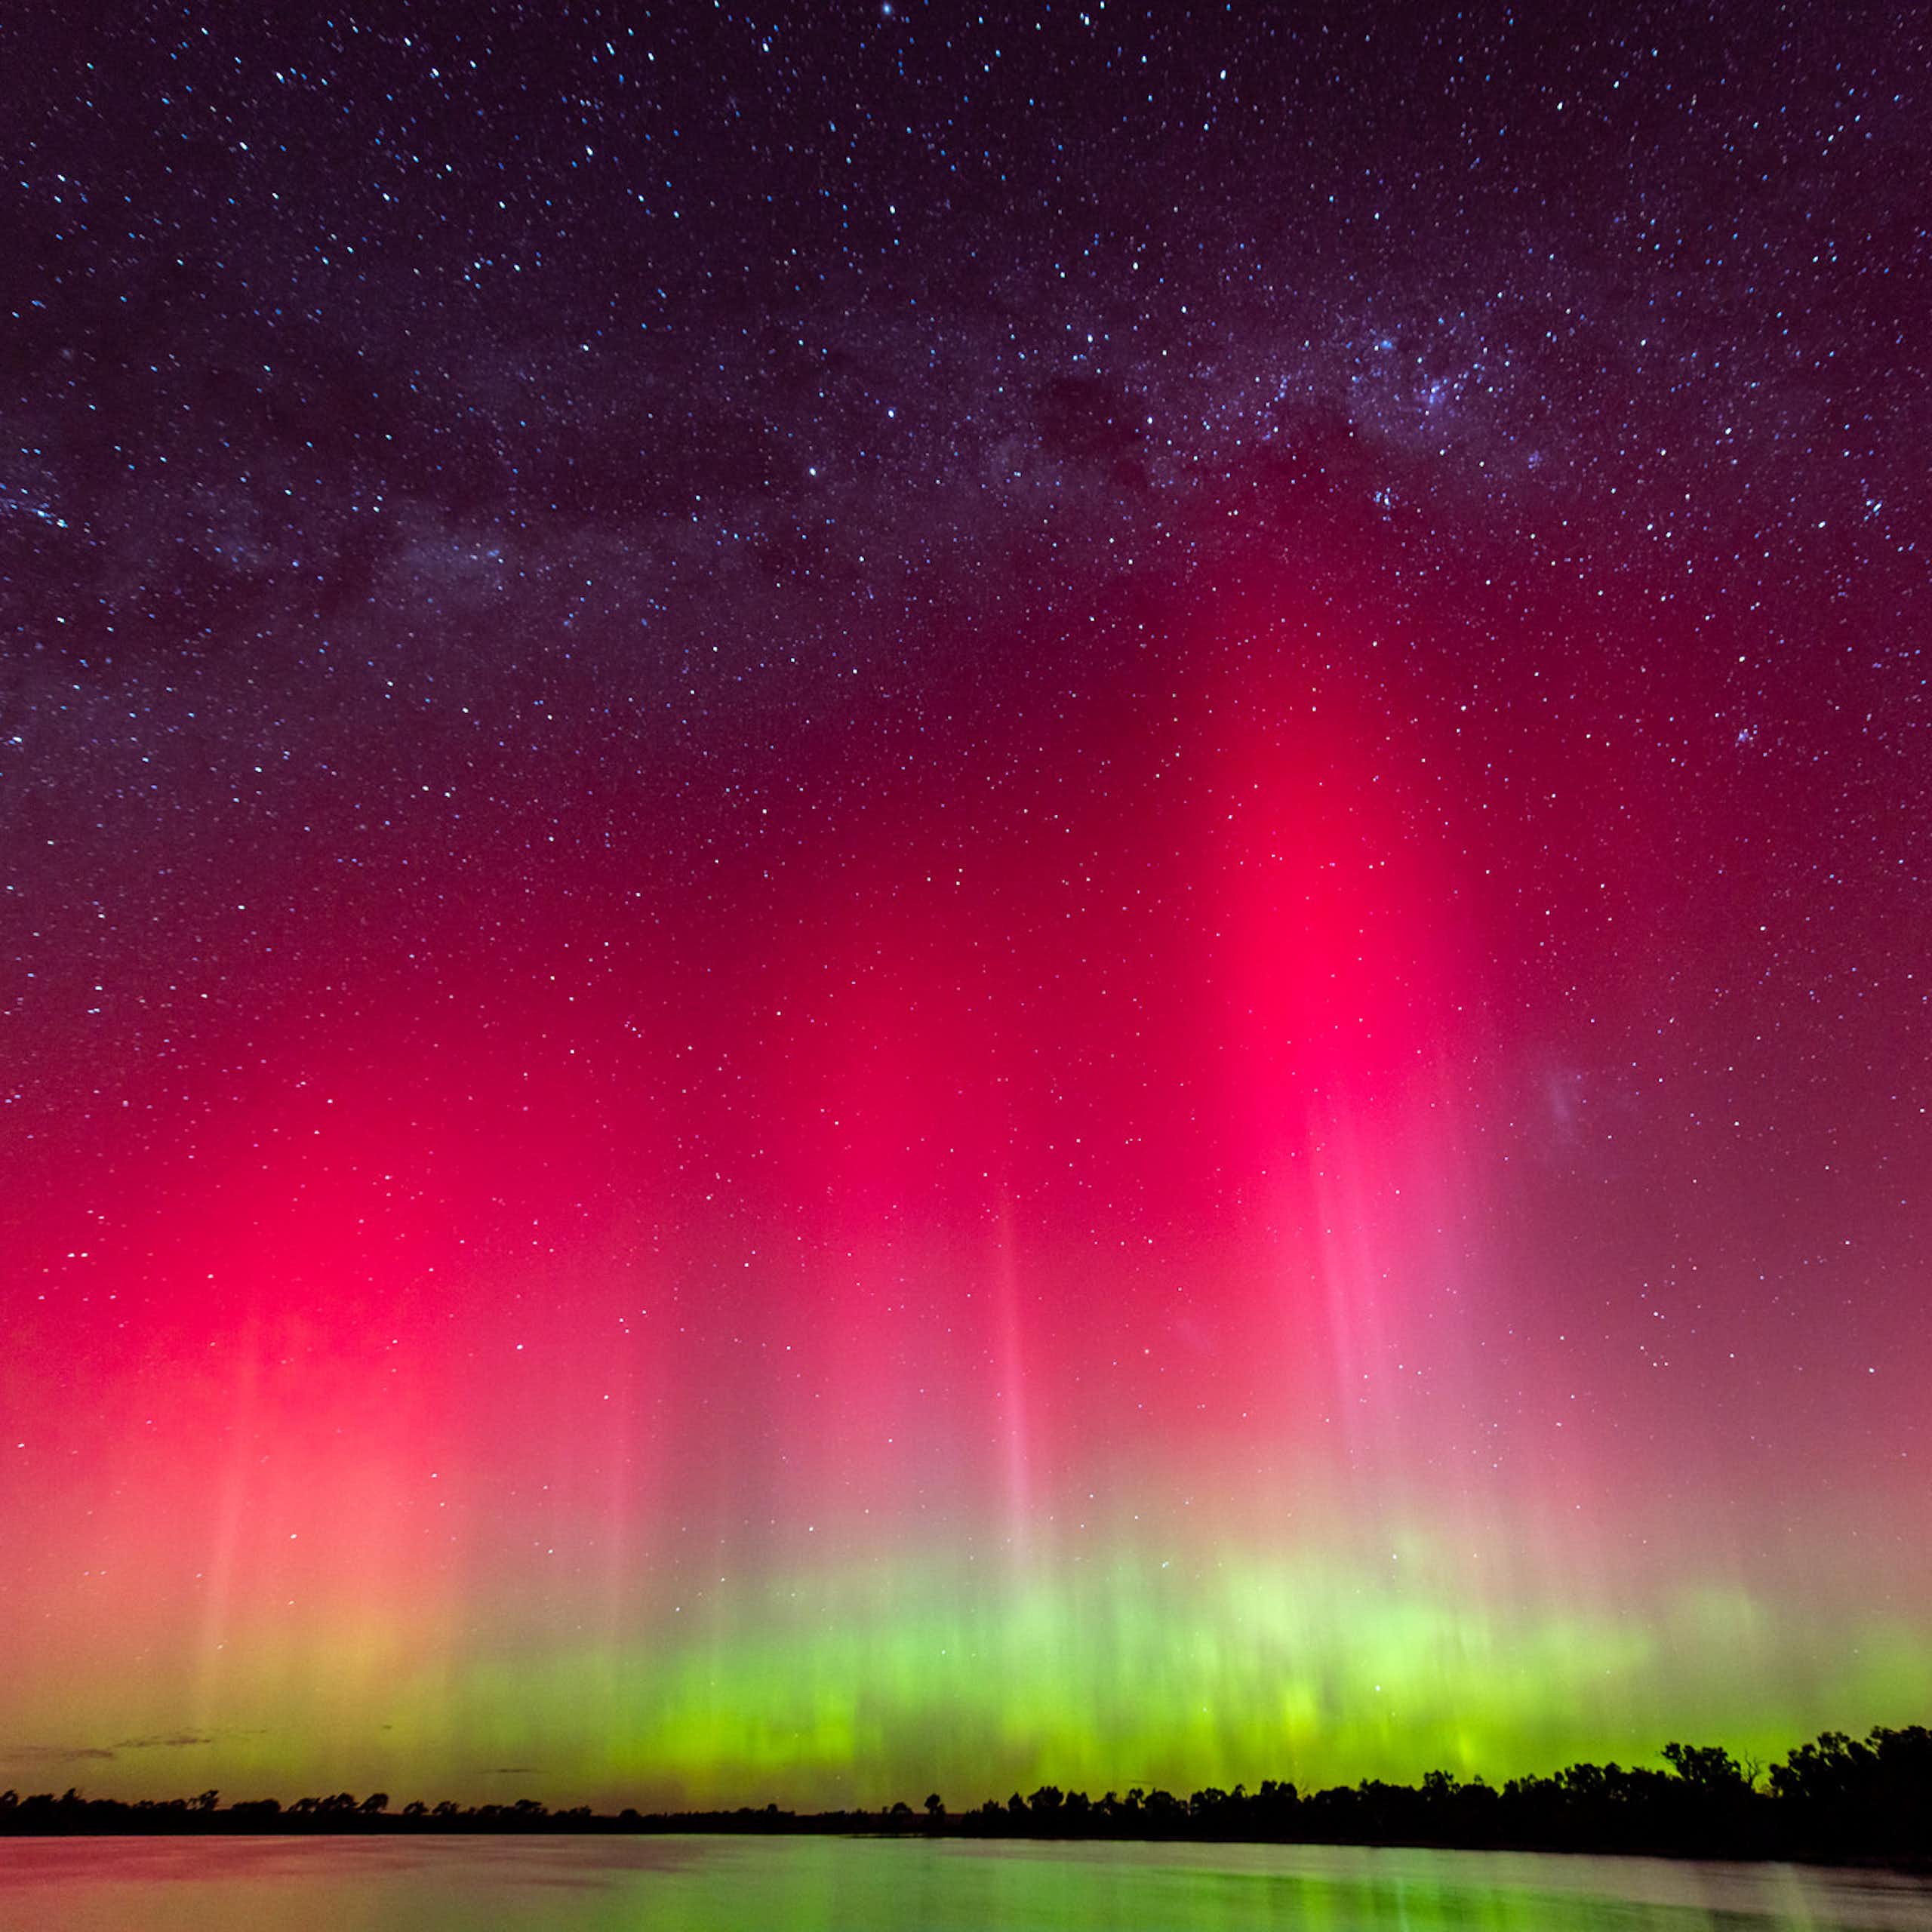 A bright pink and red sky with green lights underneath.